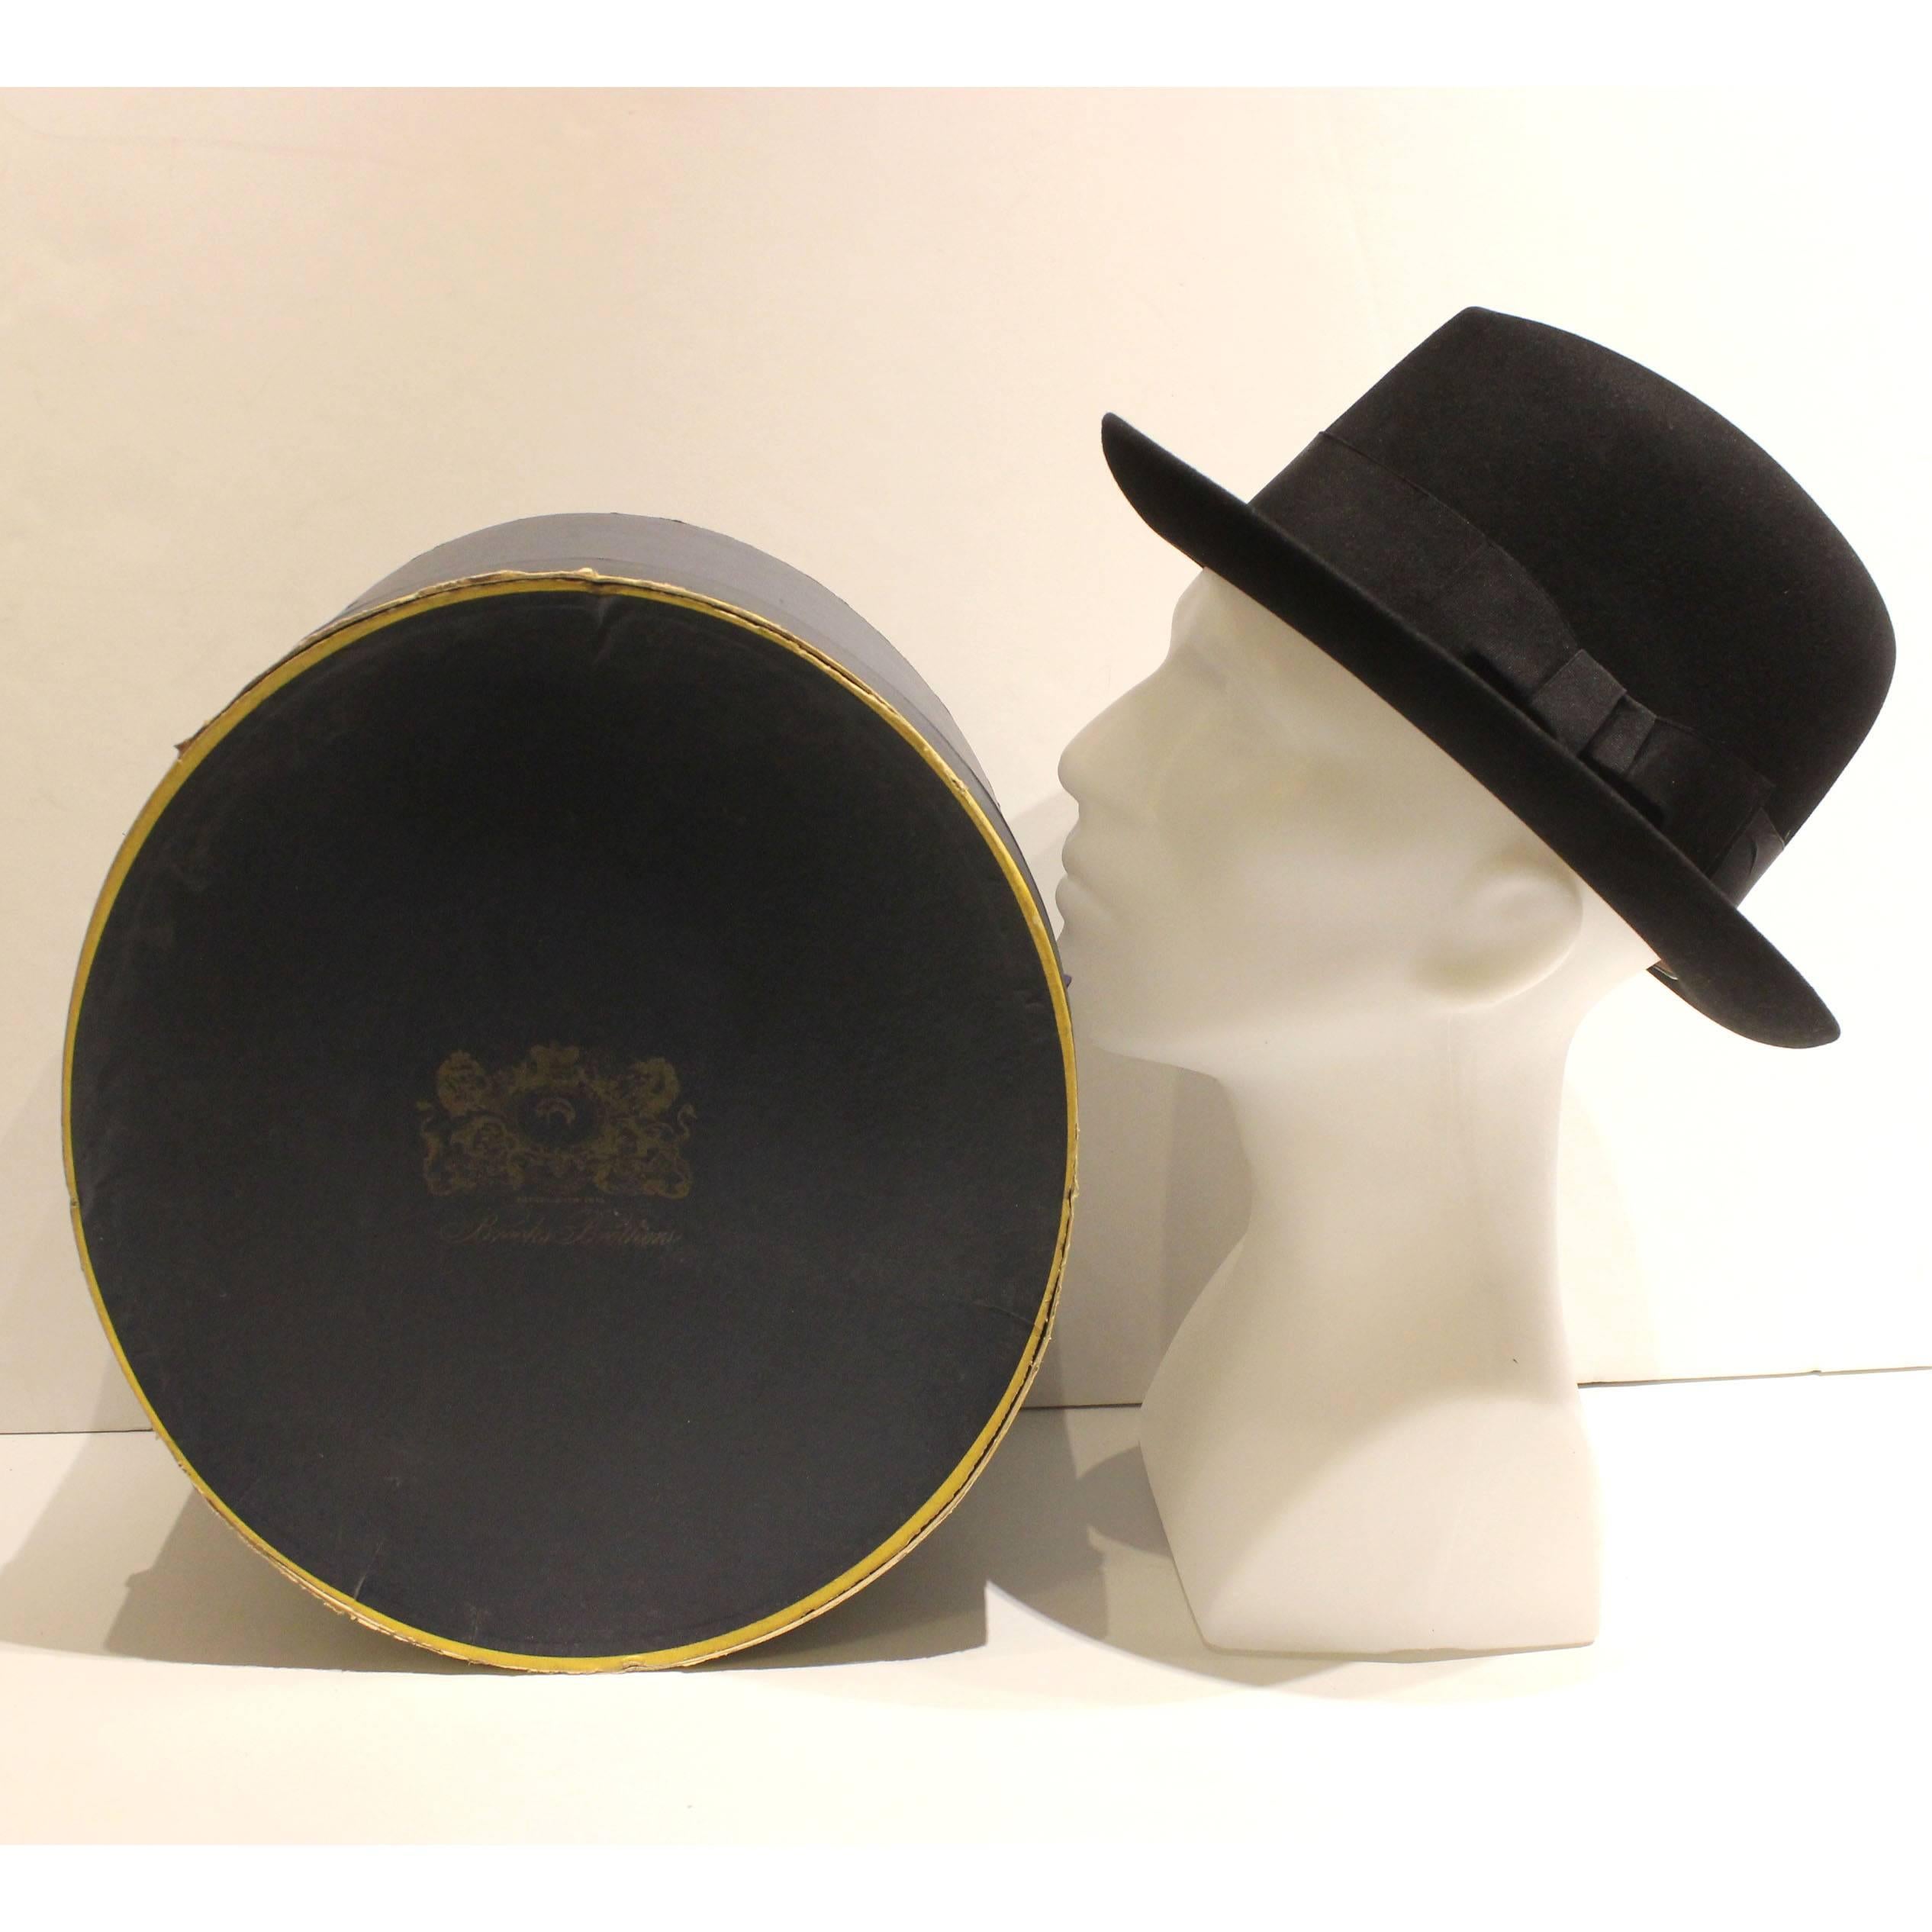 This 40's style black fedora with a black ribbon is made by Lock & Co Hatters, one of the oldest hat stores in the world. Lock & Co Hatters, St. James Street London was established in 1759. The brim is 2.55